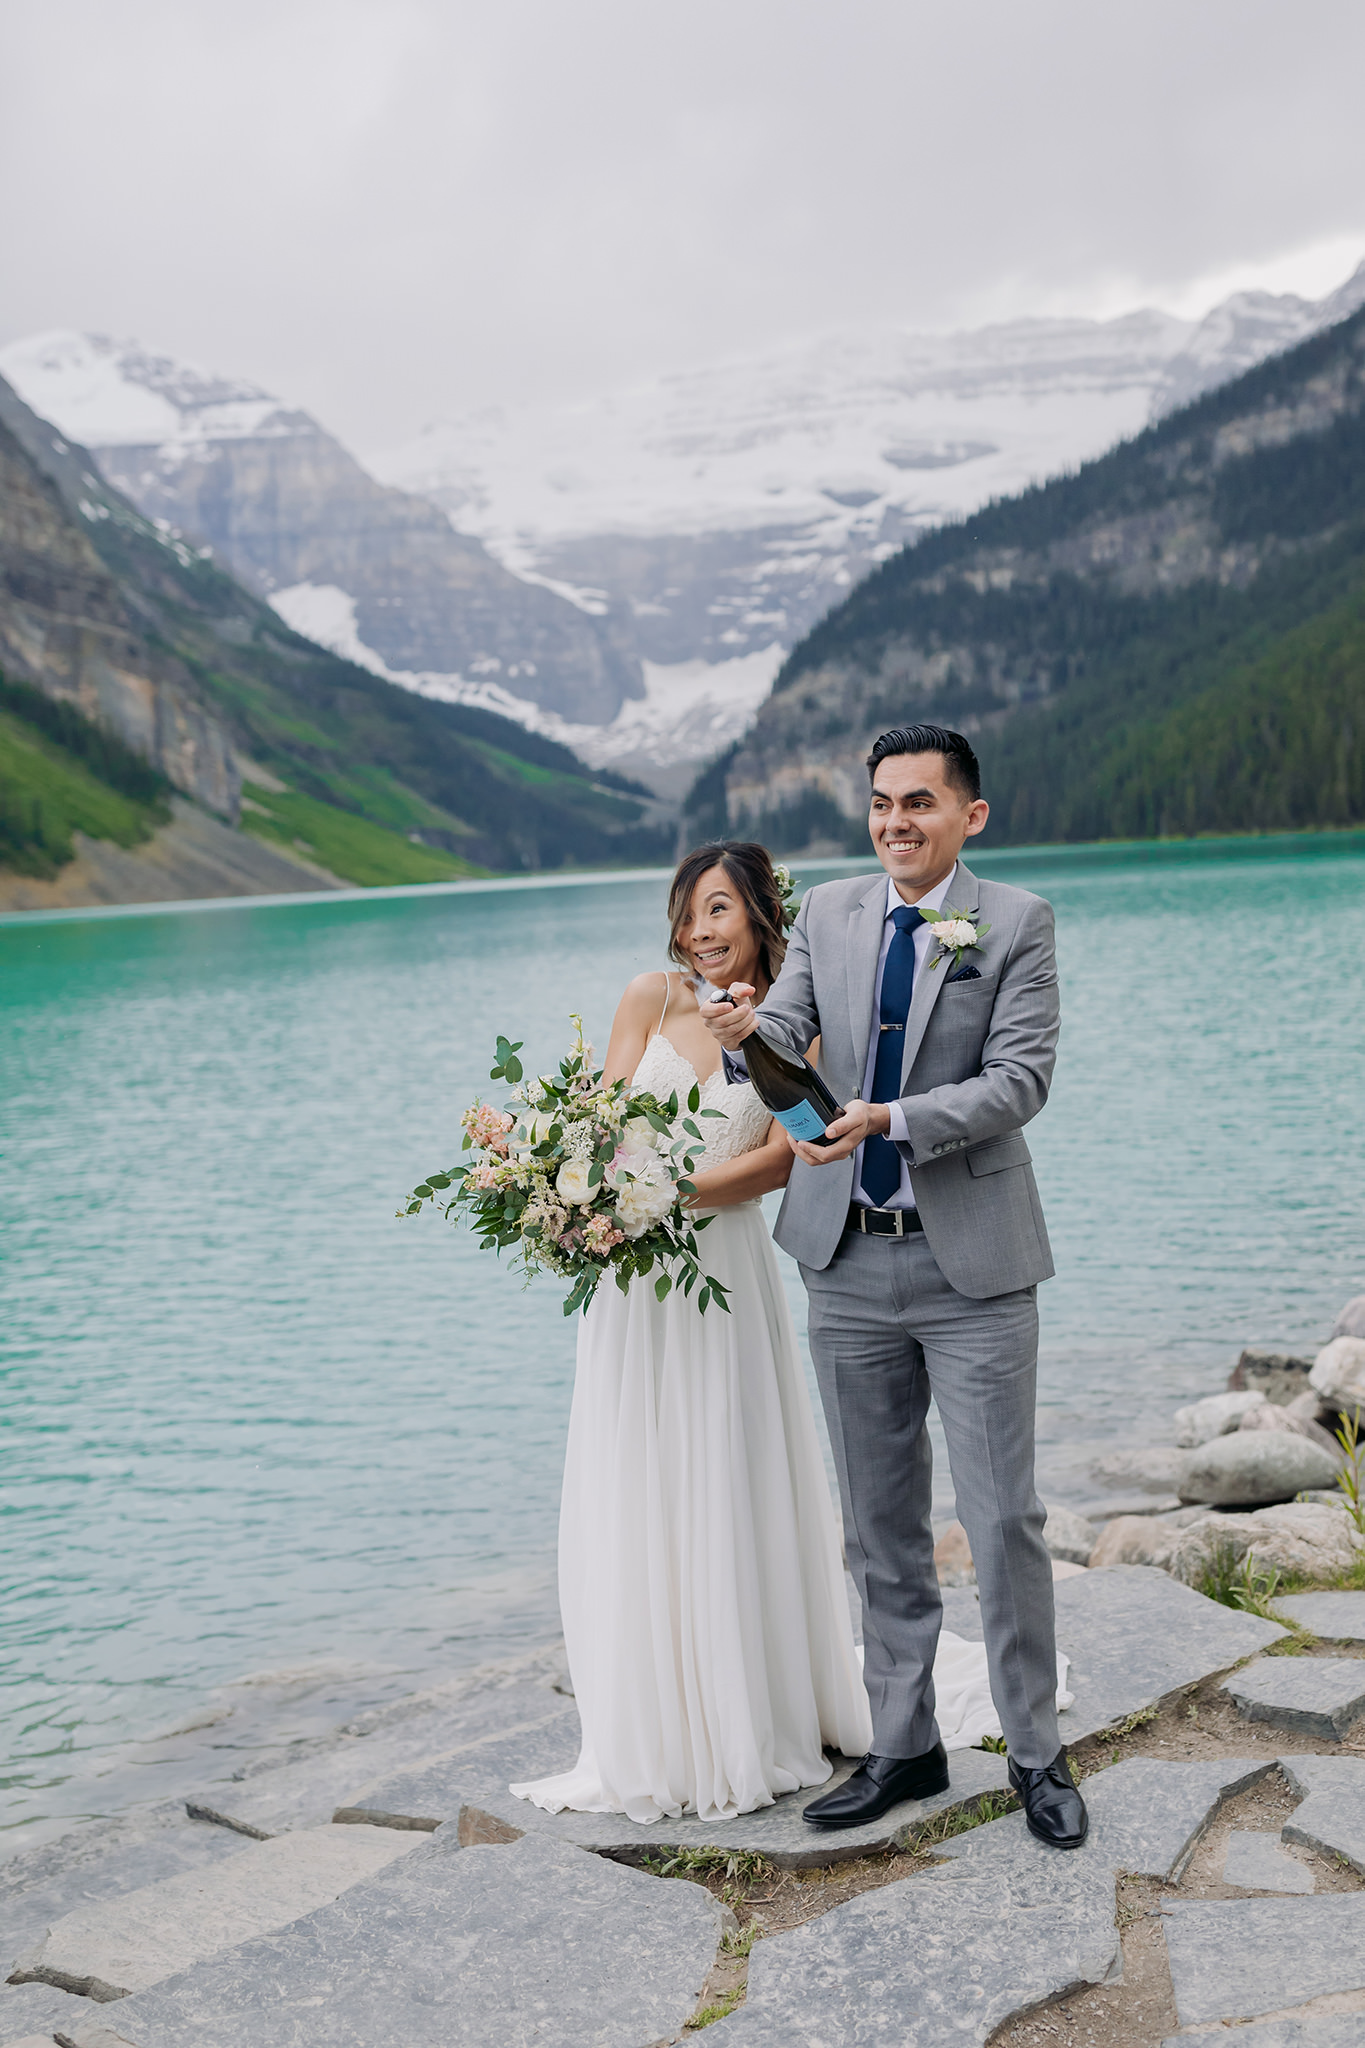 Lake Louise lakeshore wedding champagne toast photographed by elopement photographer ENV Photography